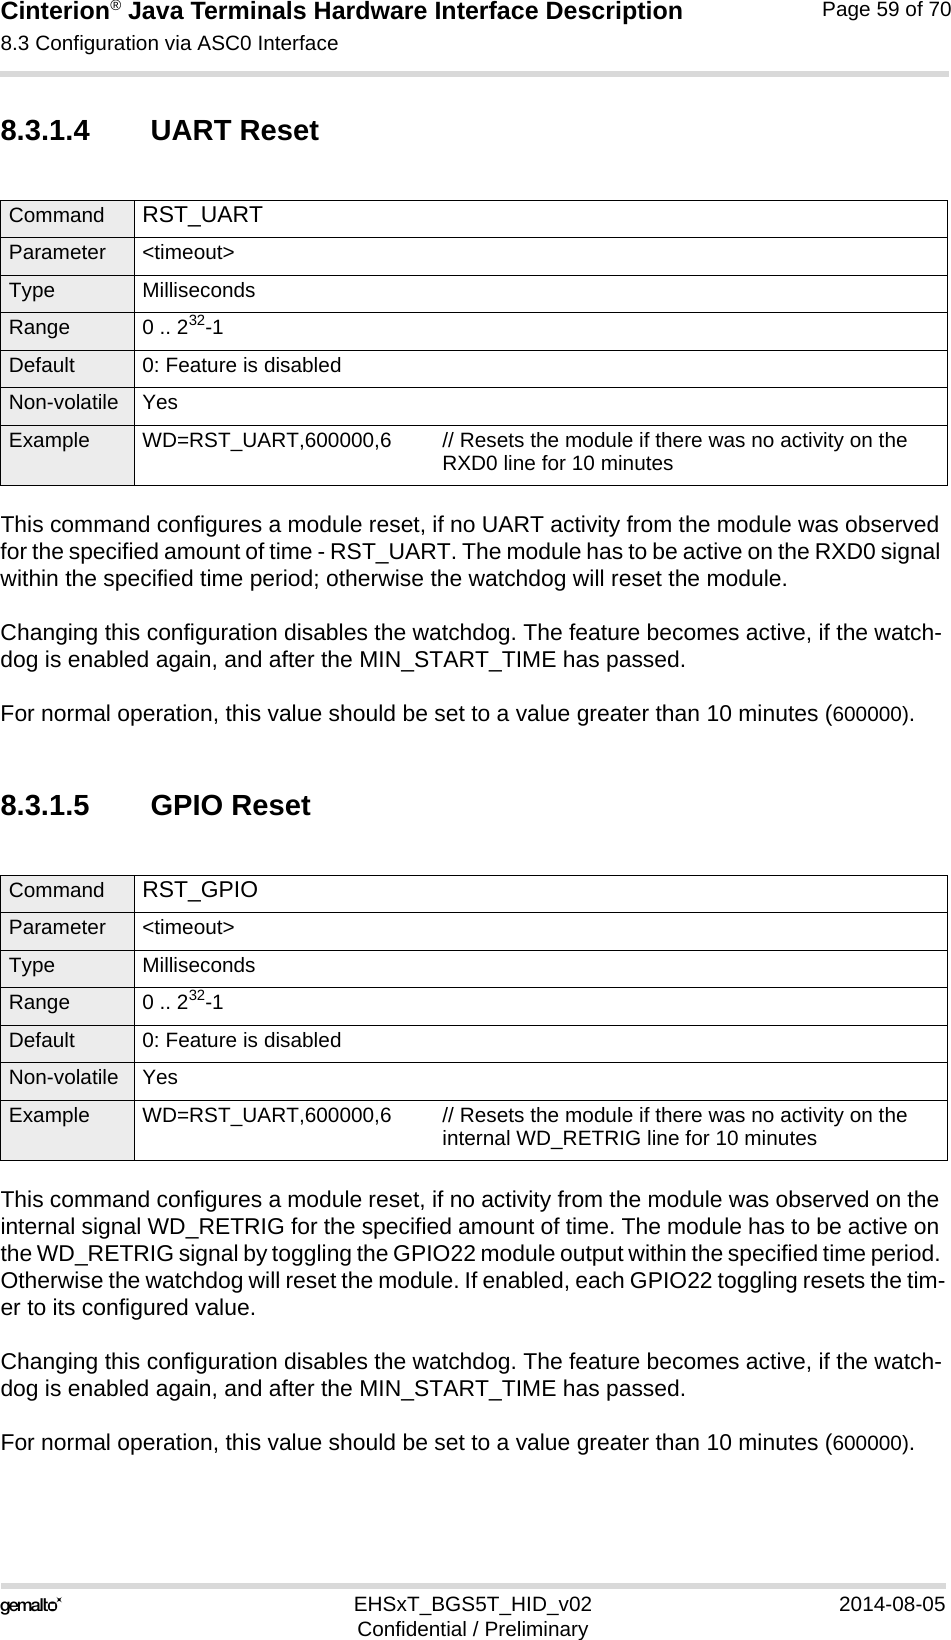 Cinterion® Java Terminals Hardware Interface Description8.3 Configuration via ASC0 Interface69EHSxT_BGS5T_HID_v02 2014-08-05Confidential / PreliminaryPage 59 of 708.3.1.4 UART ResetThis command configures a module reset, if no UART activity from the module was observed for the specified amount of time - RST_UART. The module has to be active on the RXD0 signal within the specified time period; otherwise the watchdog will reset the module.Changing this configuration disables the watchdog. The feature becomes active, if the watch-dog is enabled again, and after the MIN_START_TIME has passed.For normal operation, this value should be set to a value greater than 10 minutes (600000).8.3.1.5 GPIO ResetThis command configures a module reset, if no activity from the module was observed on the internal signal WD_RETRIG for the specified amount of time. The module has to be active on the WD_RETRIG signal by toggling the GPIO22 module output within the specified time period. Otherwise the watchdog will reset the module. If enabled, each GPIO22 toggling resets the tim-er to its configured value.Changing this configuration disables the watchdog. The feature becomes active, if the watch-dog is enabled again, and after the MIN_START_TIME has passed. For normal operation, this value should be set to a value greater than 10 minutes (600000).Command RST_UART Parameter &lt;timeout&gt;Type MillisecondsRange 0 .. 232-1Default 0: Feature is disabledNon-volatile YesExample WD=RST_UART,600000,6 // Resets the module if there was no activity on theRXD0 line for 10 minutesCommand RST_GPIO Parameter &lt;timeout&gt;Type MillisecondsRange 0 .. 232-1Default 0: Feature is disabledNon-volatile YesExample WD=RST_UART,600000,6 // Resets the module if there was no activity on theinternal WD_RETRIG line for 10 minutes